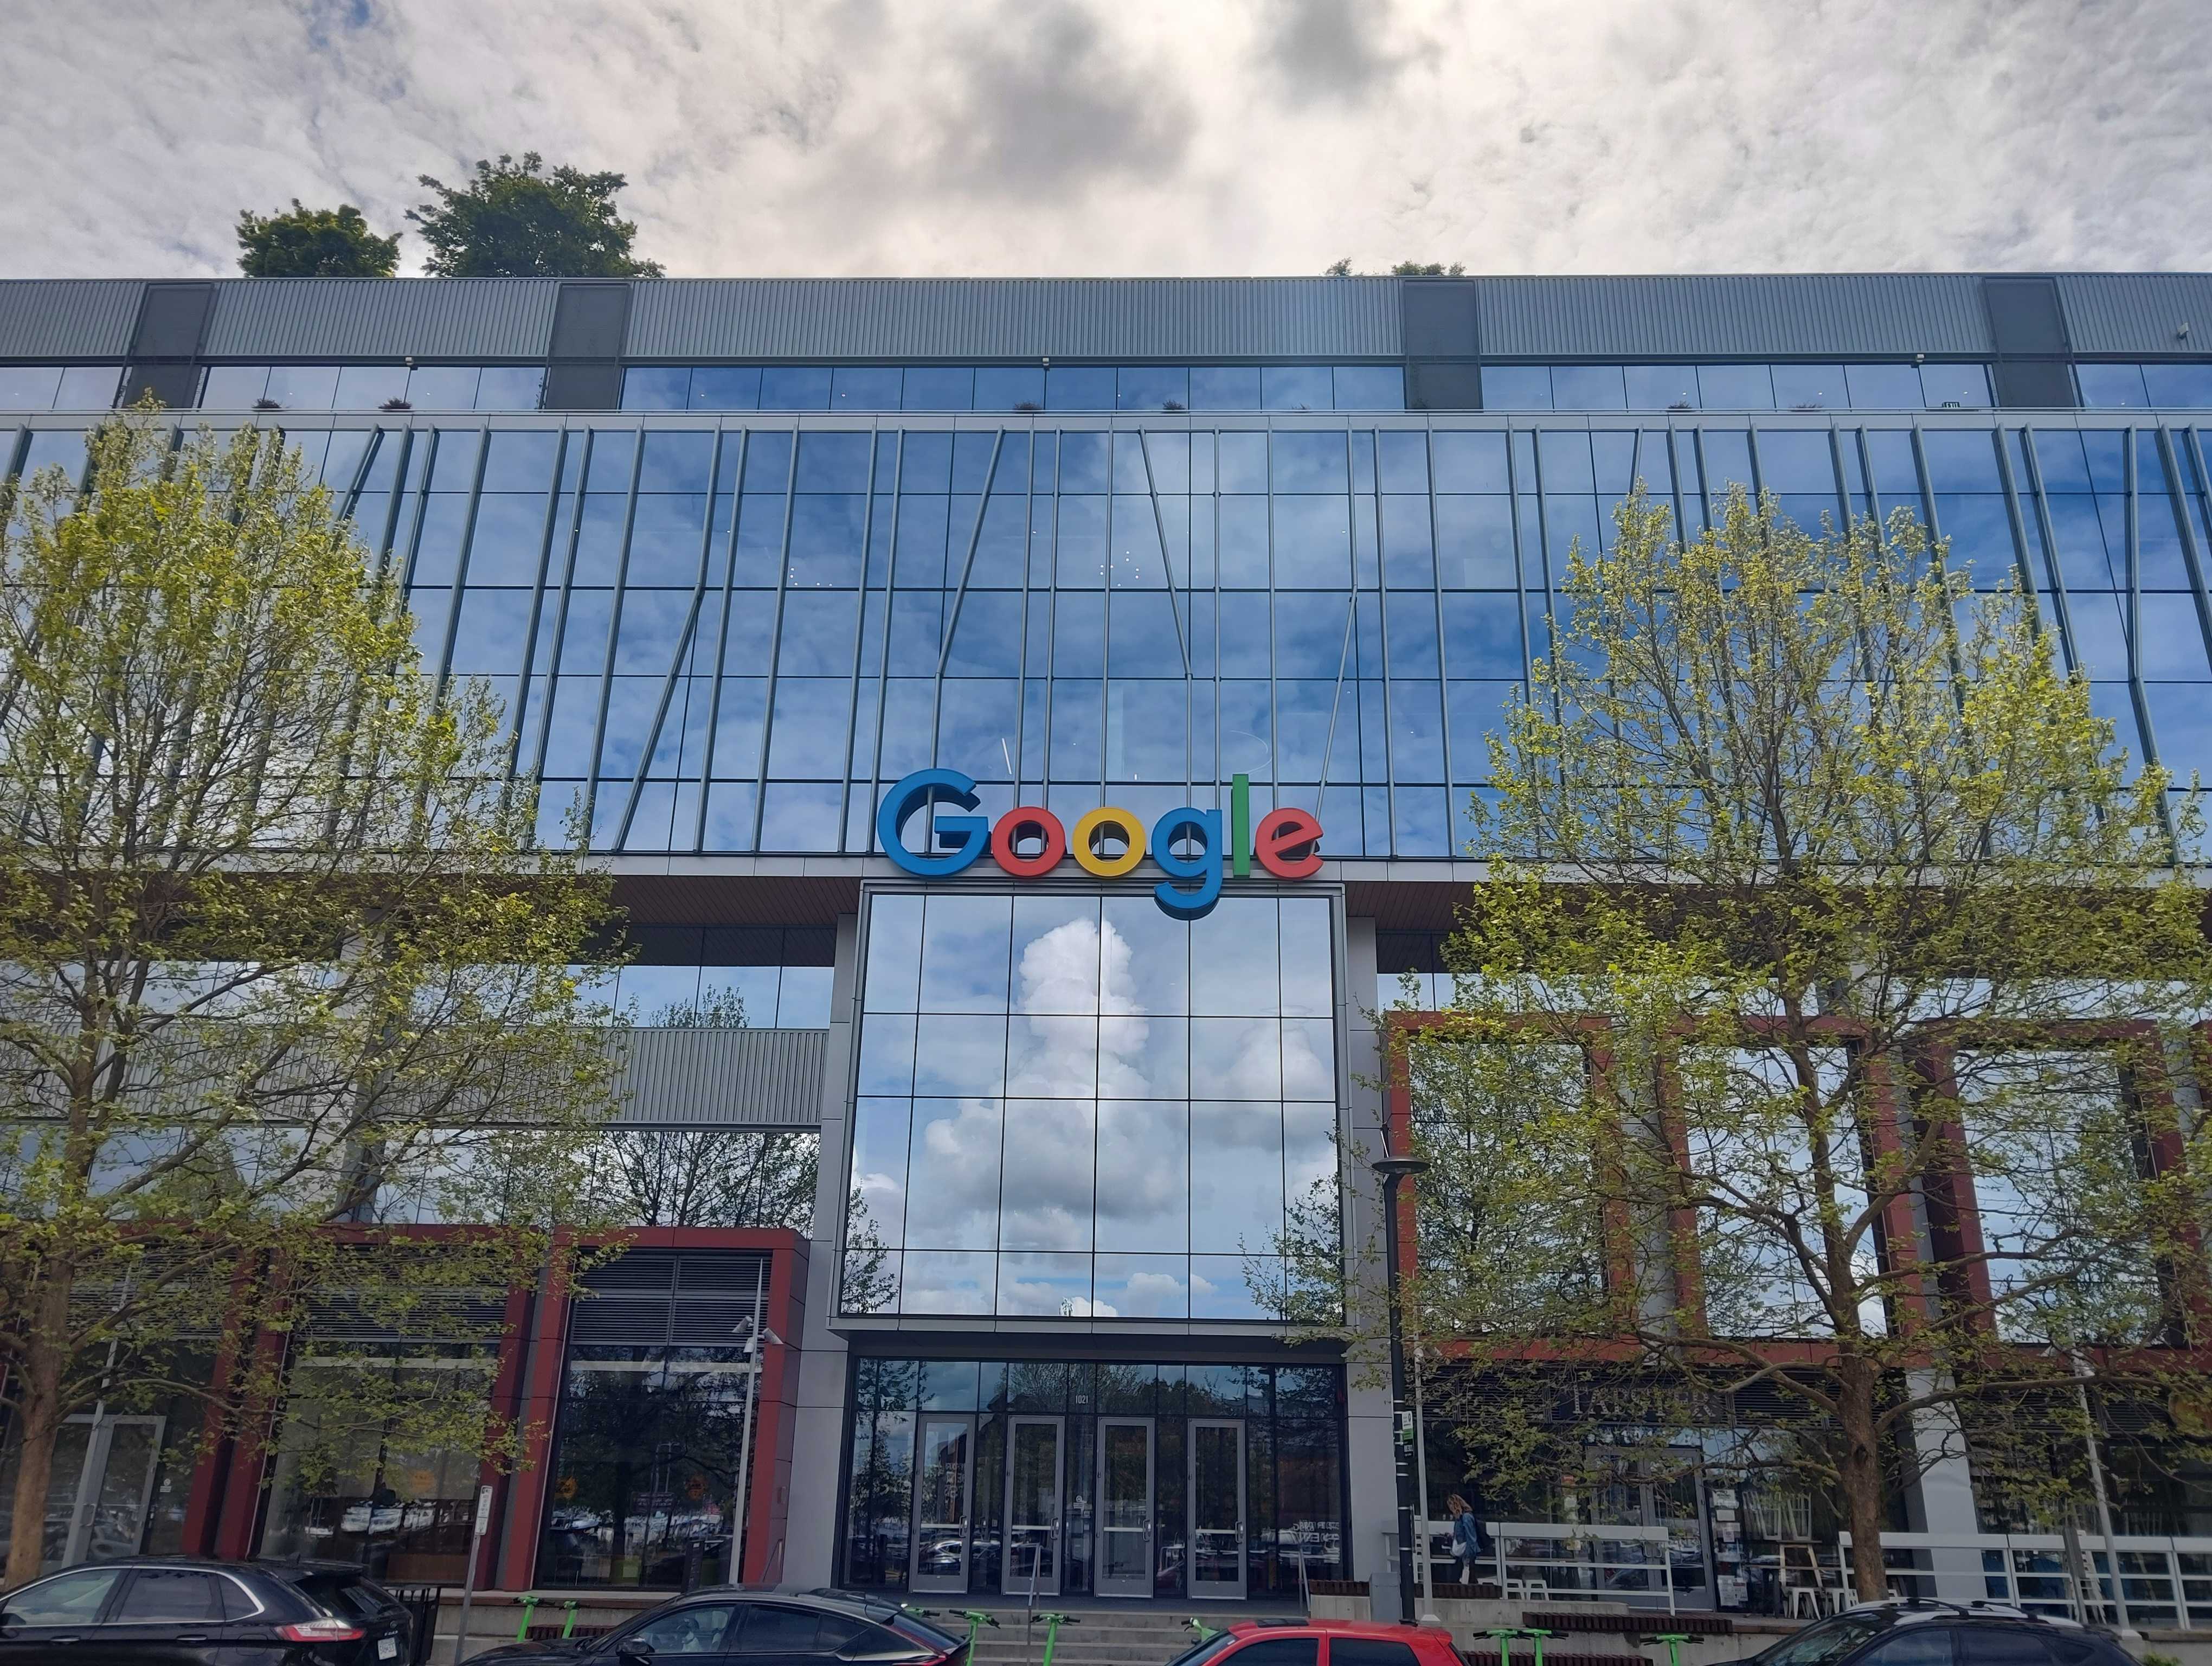 The front of a building with the Google moniker on it